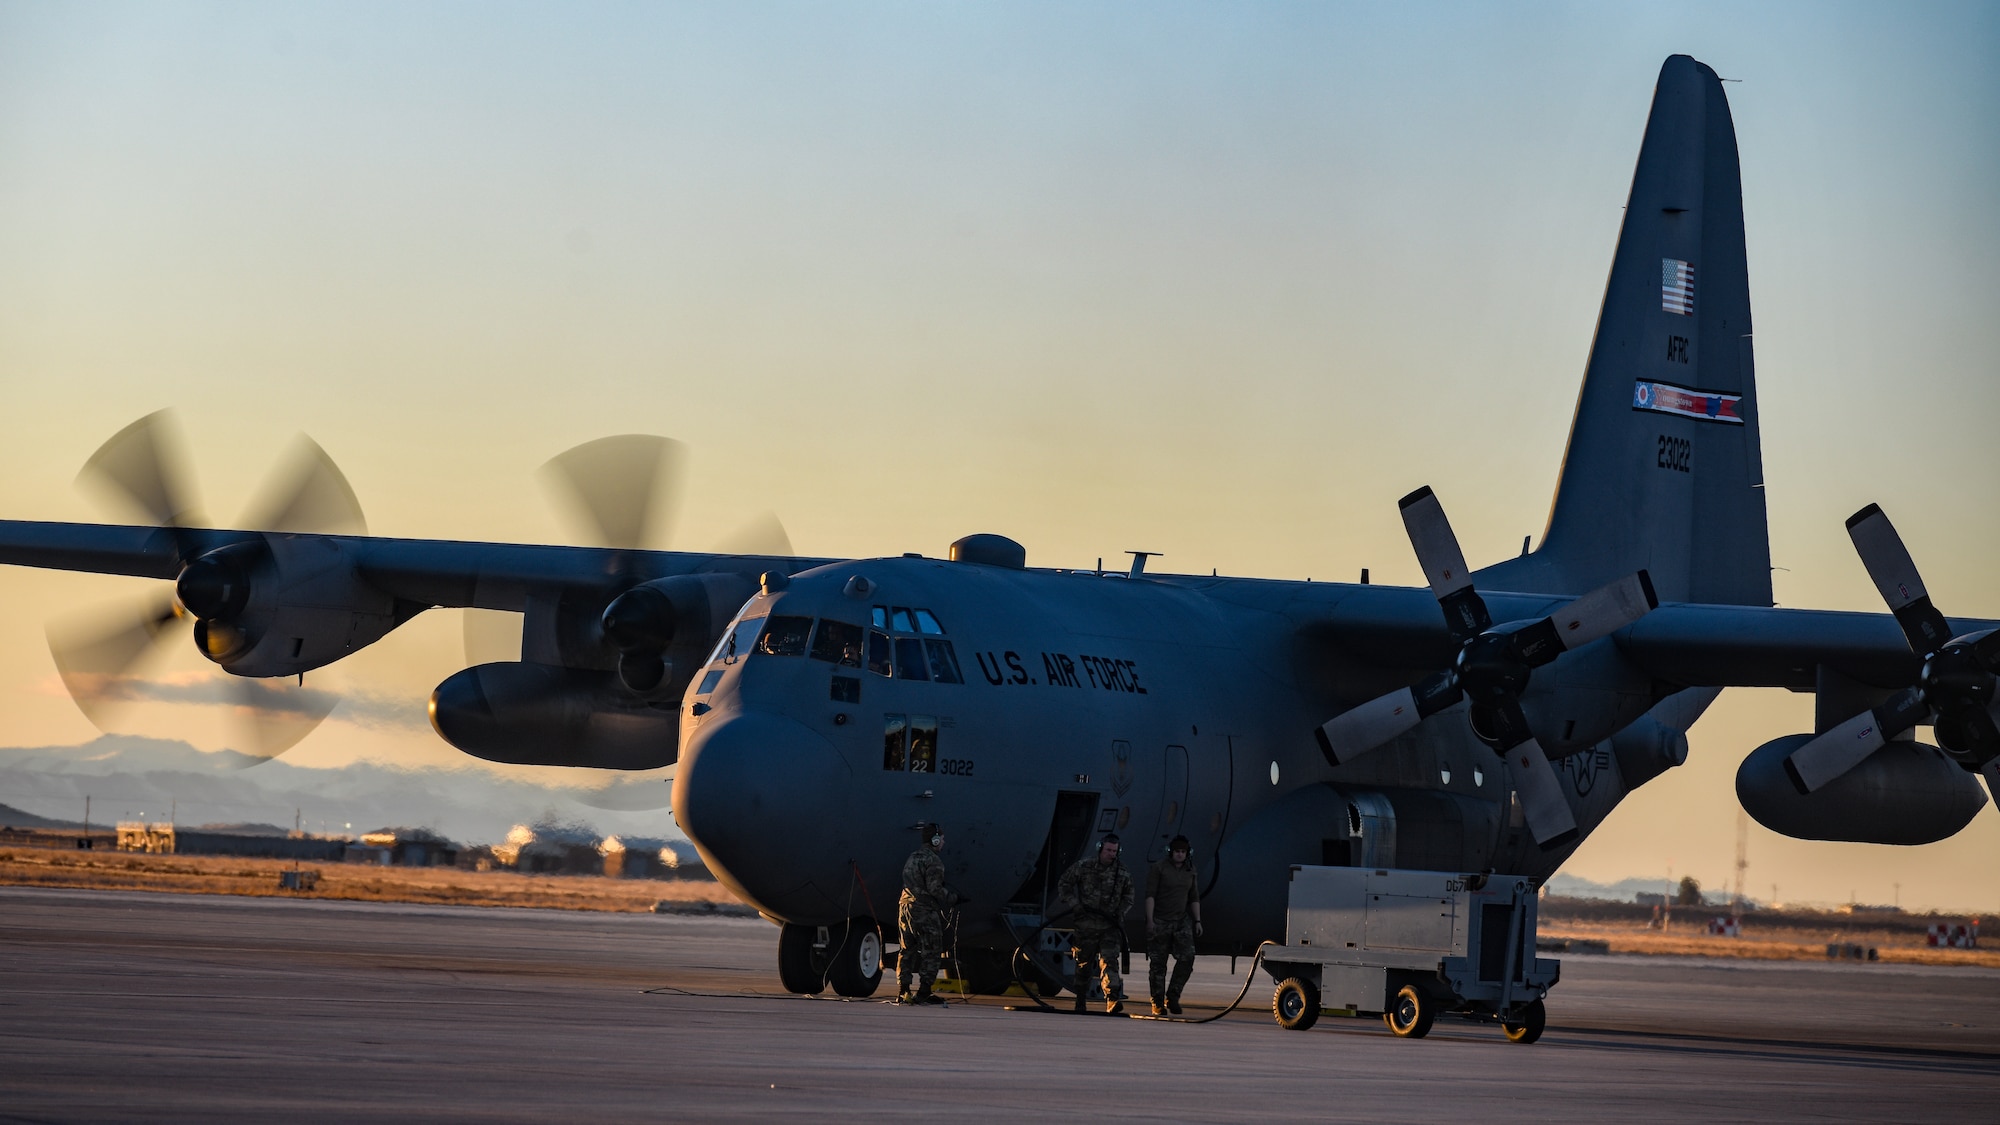 Aerospace propulsion technicians assigned to the 910th Aircraft Maintenance Squadron run an engine test on a 910th Airlift Wing C-130H Hercules aircraft, Jan. 17, 2023, at Mountain Home Air Force Base, Idaho.